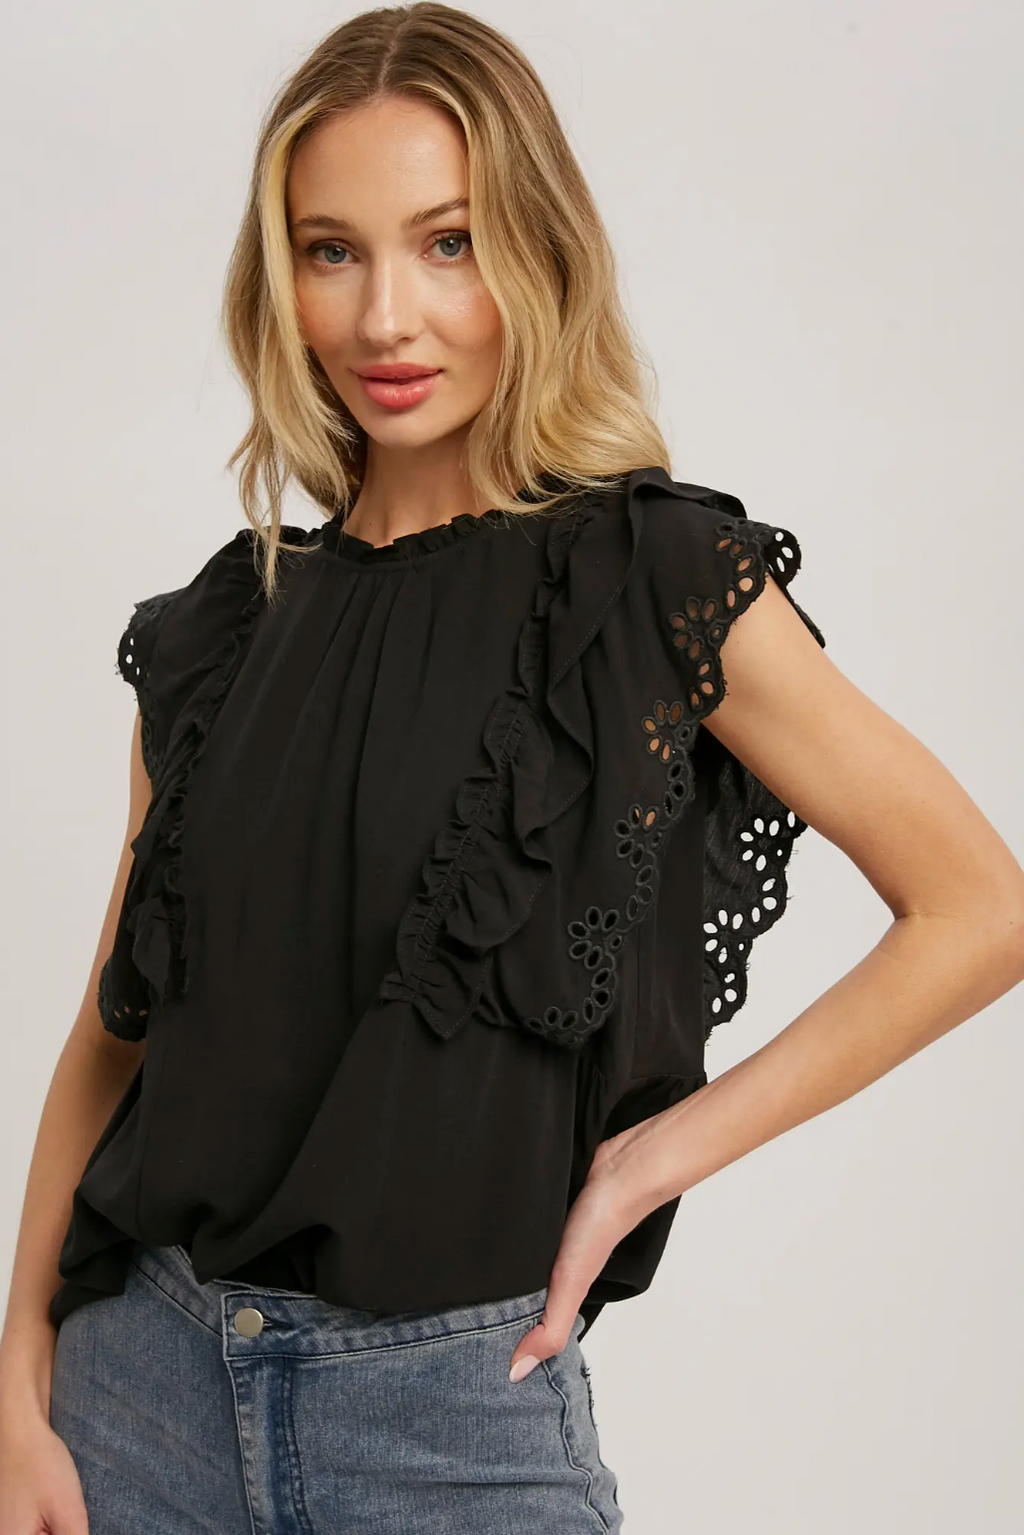 BLUIVY EYELET LACE BLOUSE